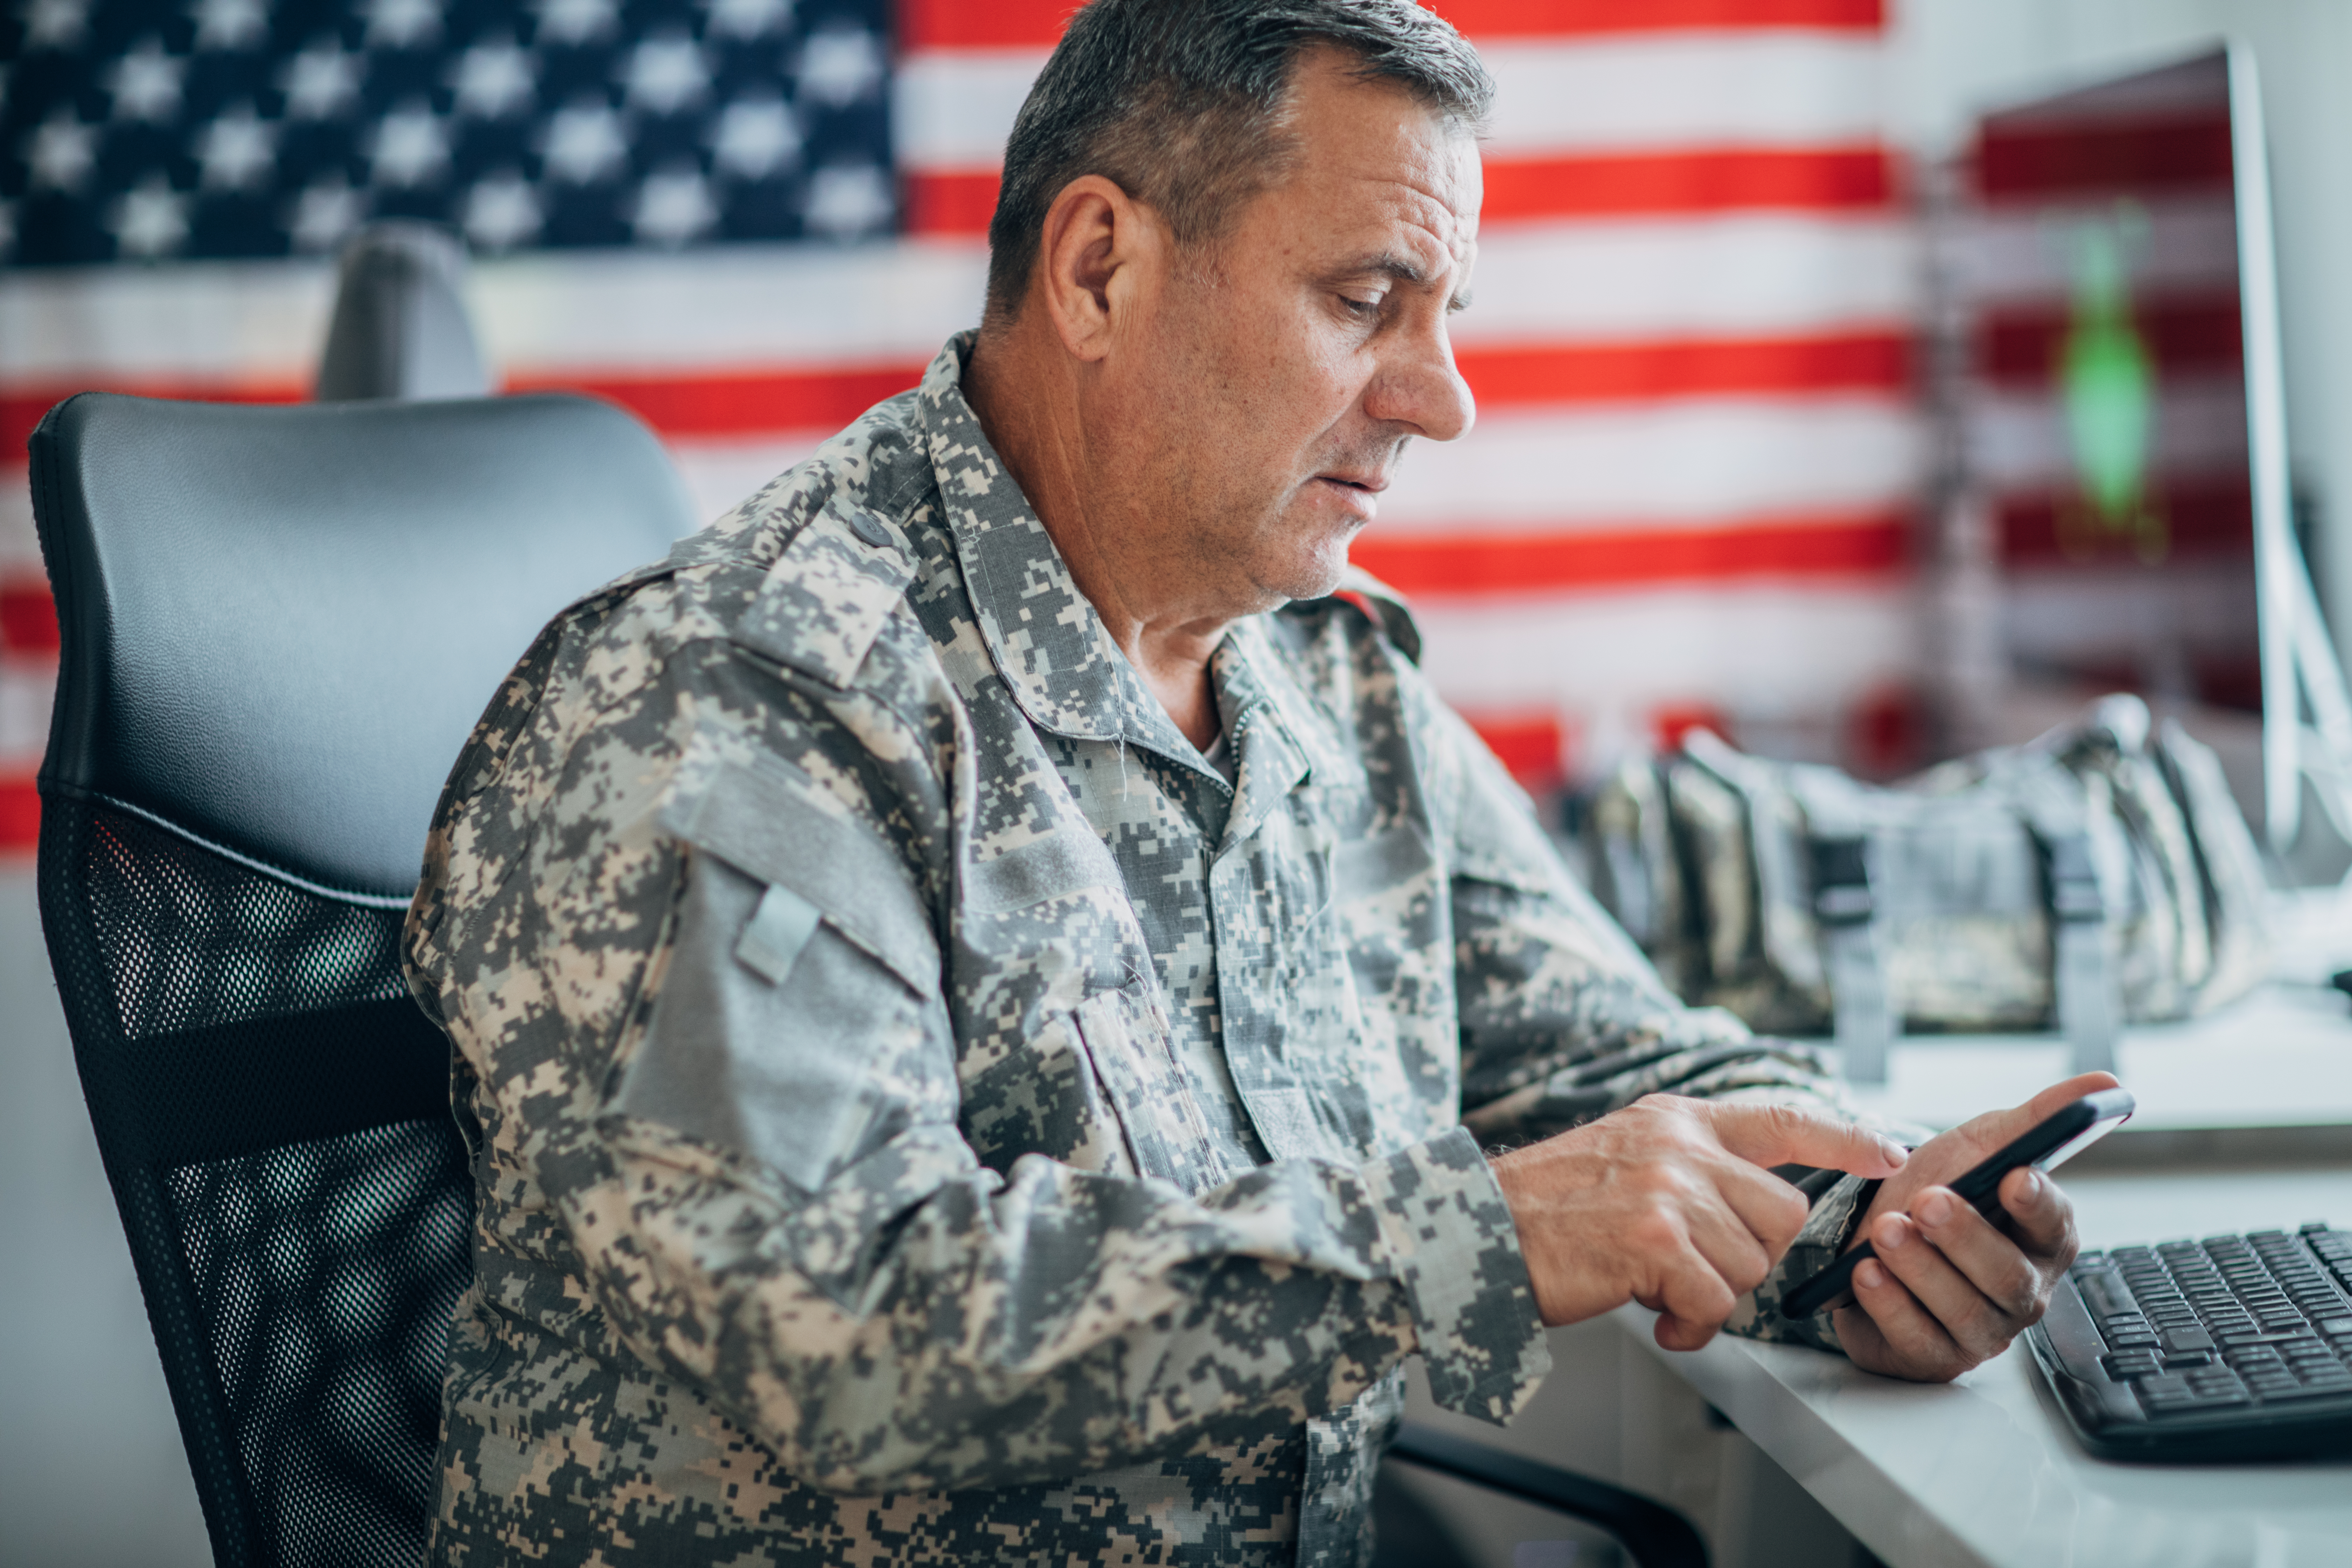 Apple Health Records Now Available for Veterans